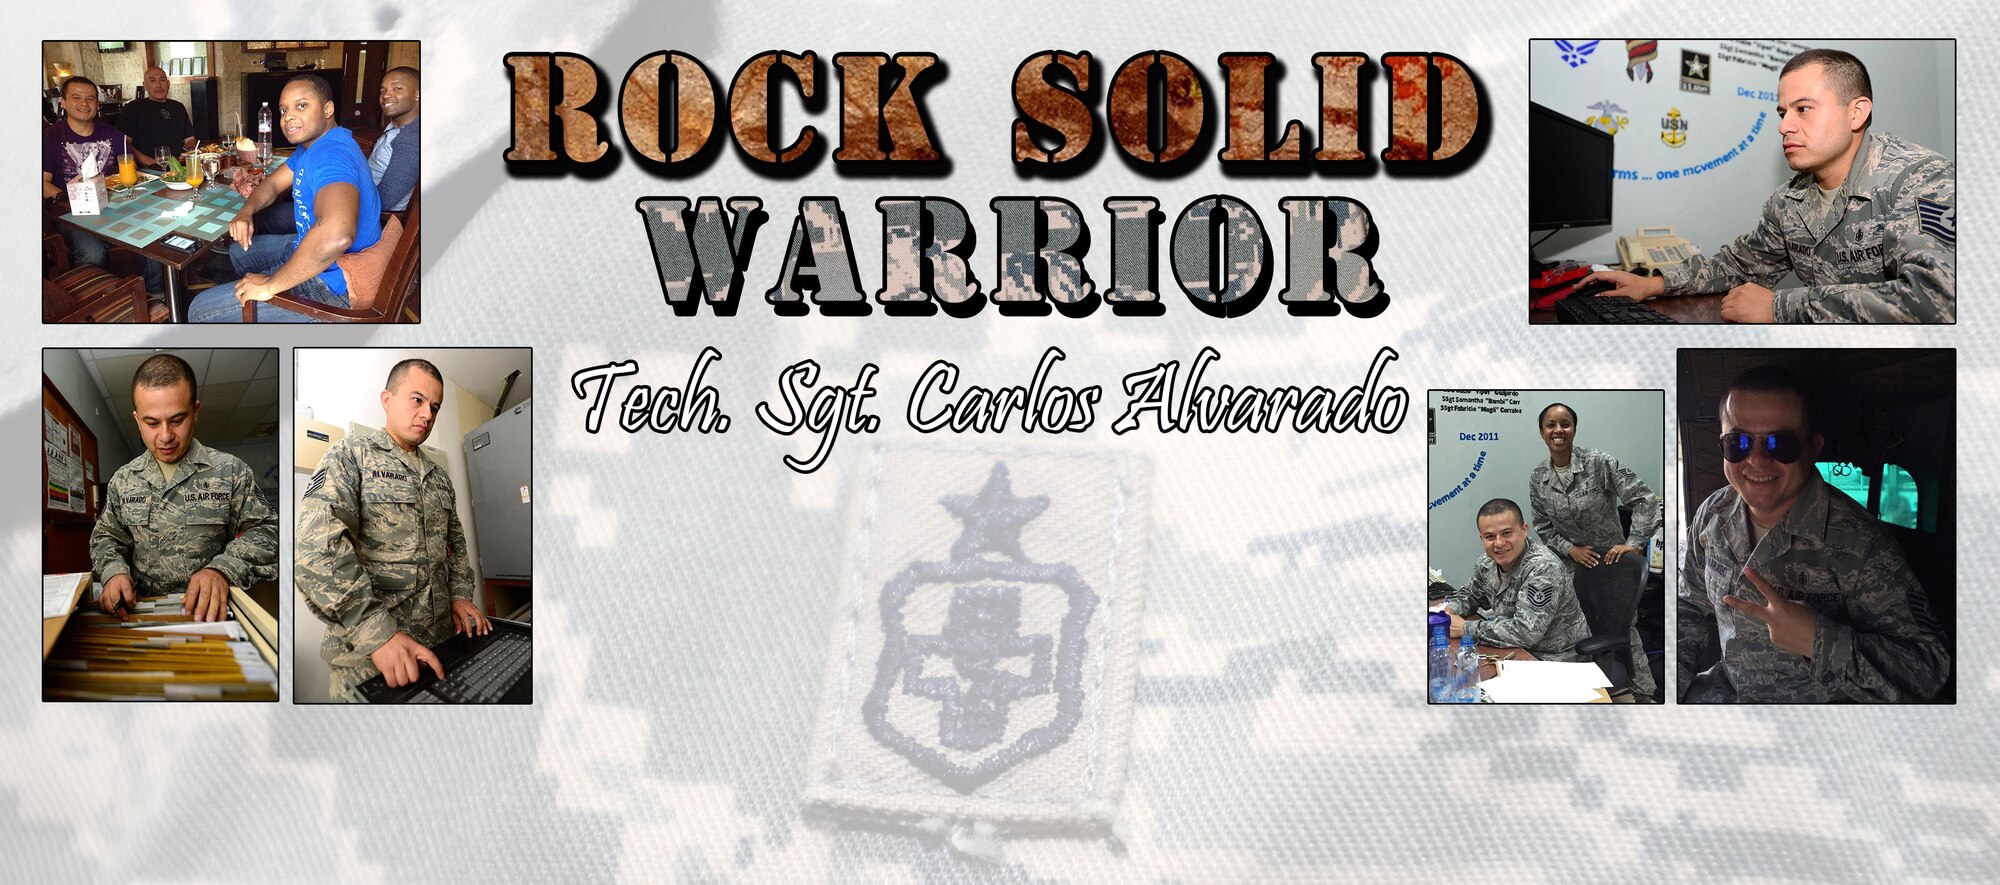 This week’s Rock Solid Warrior is Tech. Sgt. Carlos Alvarado, a 386th Expeditionary Medical Squadron medical administration services noncommissioned officer in charge. Alvarado is deployed from the 96th Medical Operation Squadron at Eglin Air Force Base, Fla.